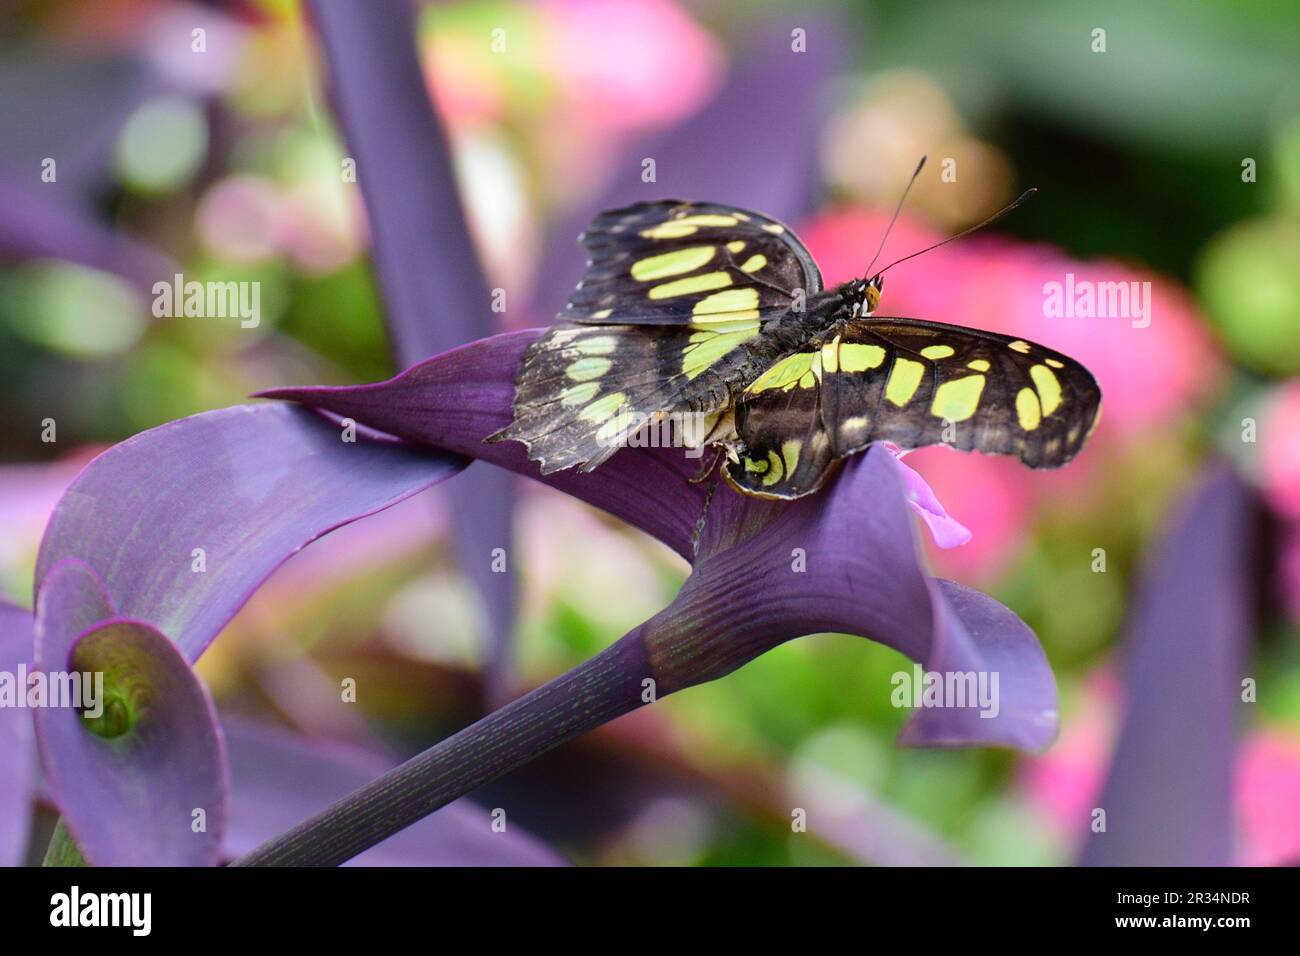 Black and yellow butterfly on  flower Stock Photo